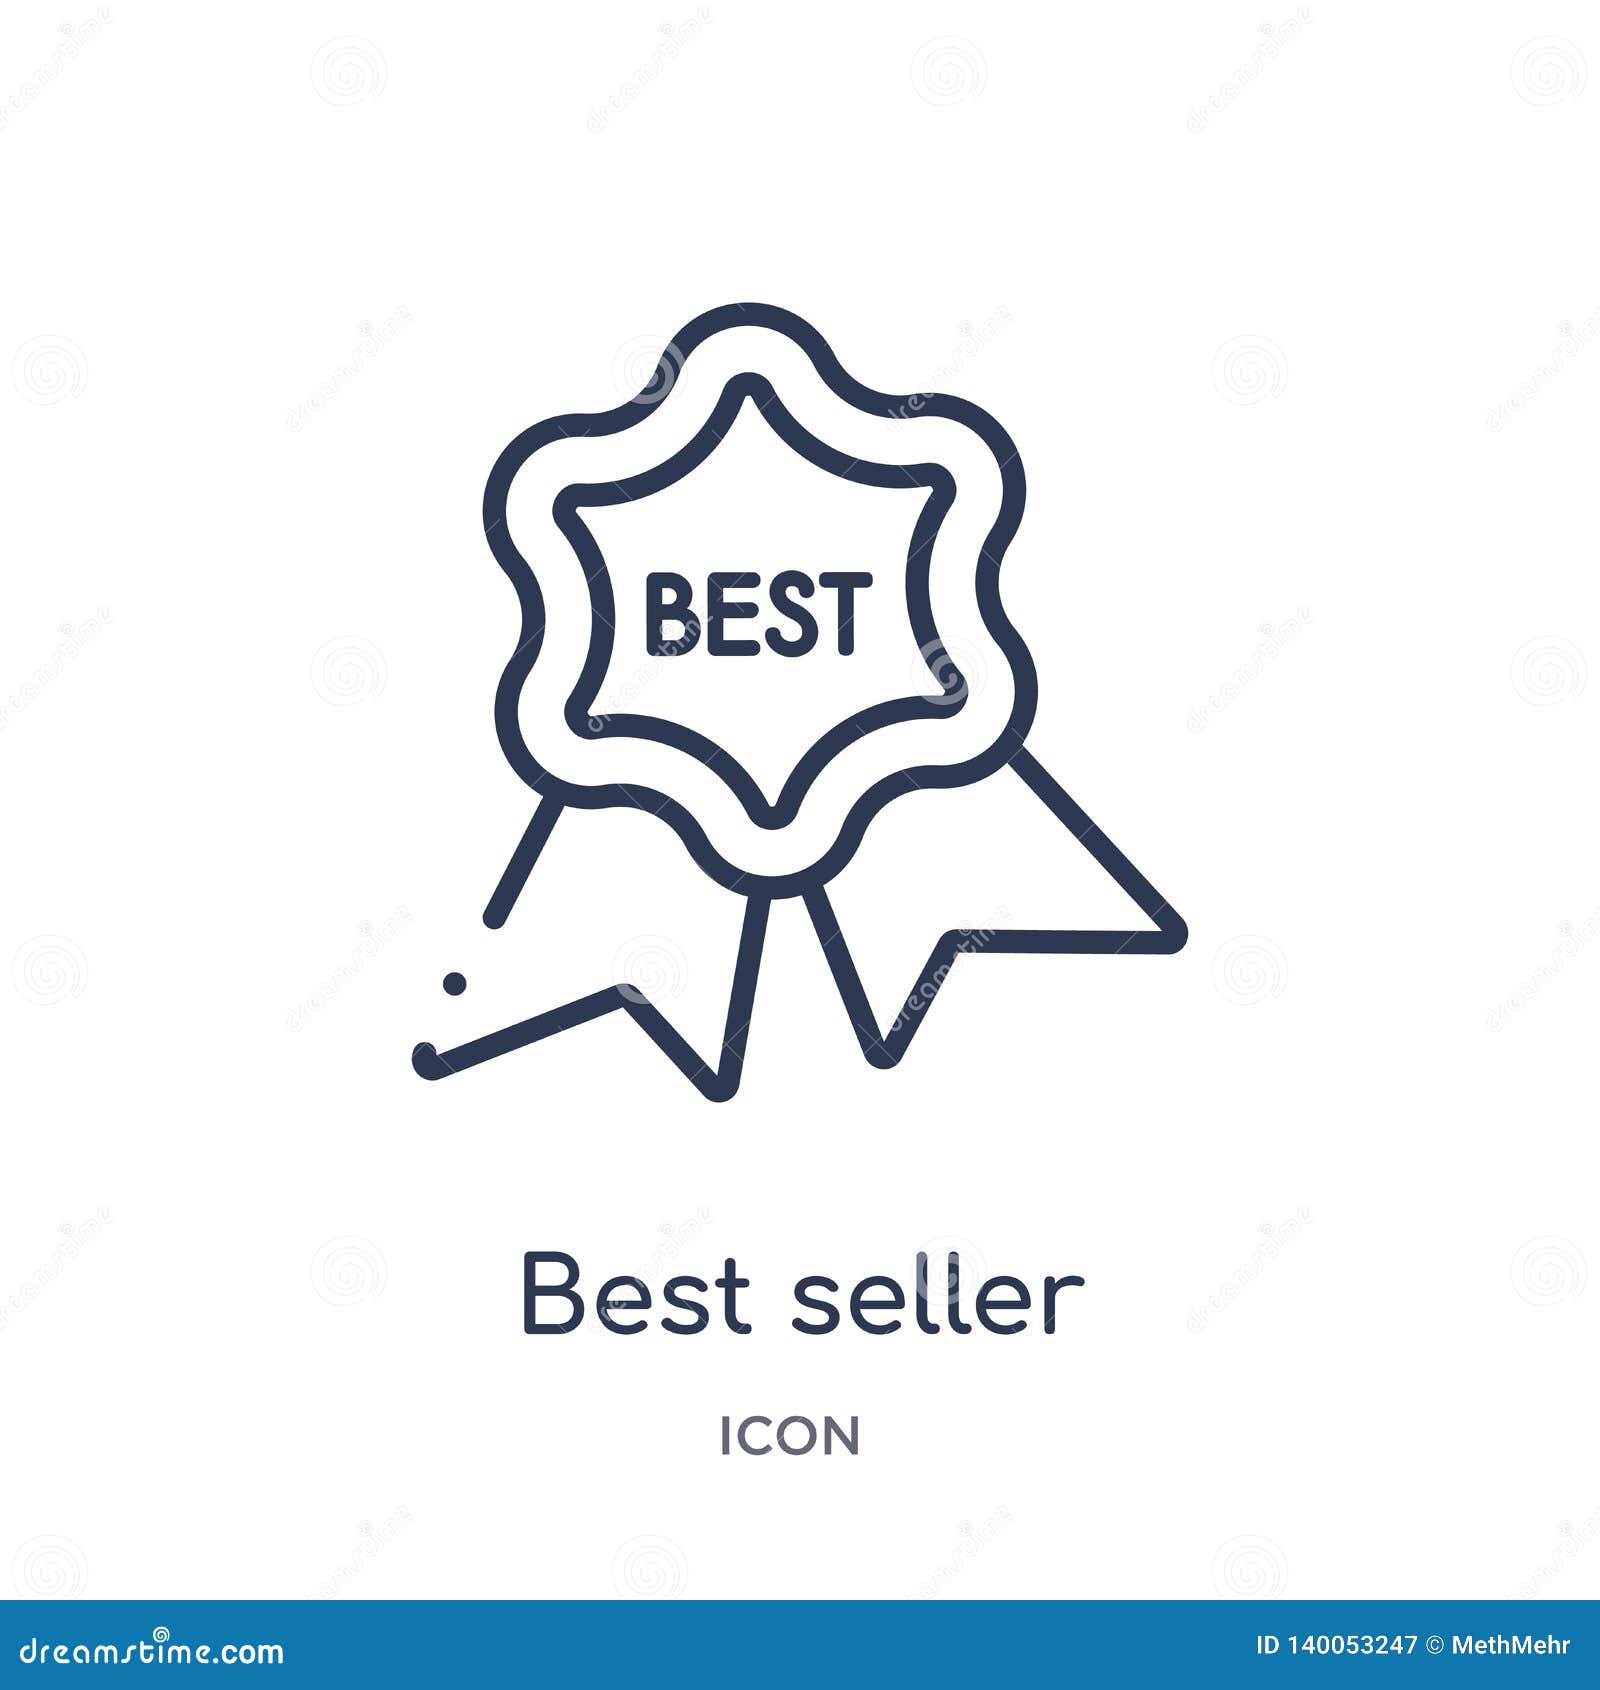 https://thumbs.dreamstime.com/z/linear-best-seller-icon-cryptocurrency-economy-finance-outline-collection-thin-line-vector-isolated-white-background-140053247.jpg